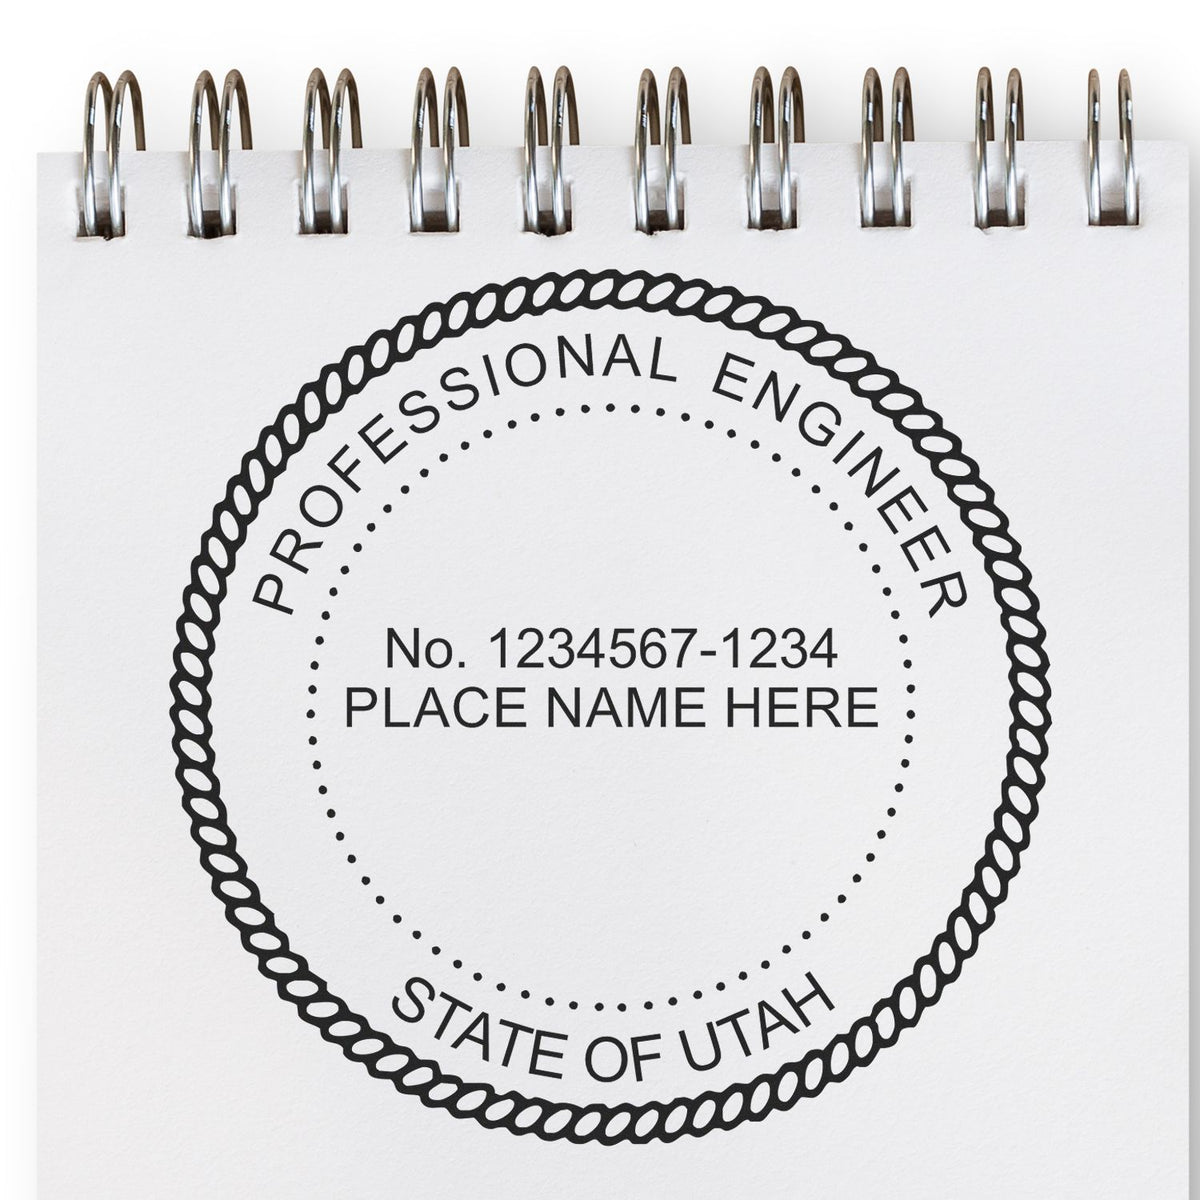 Another Example of a stamped impression of the Utah Professional Engineer Seal Stamp on a piece of office paper.